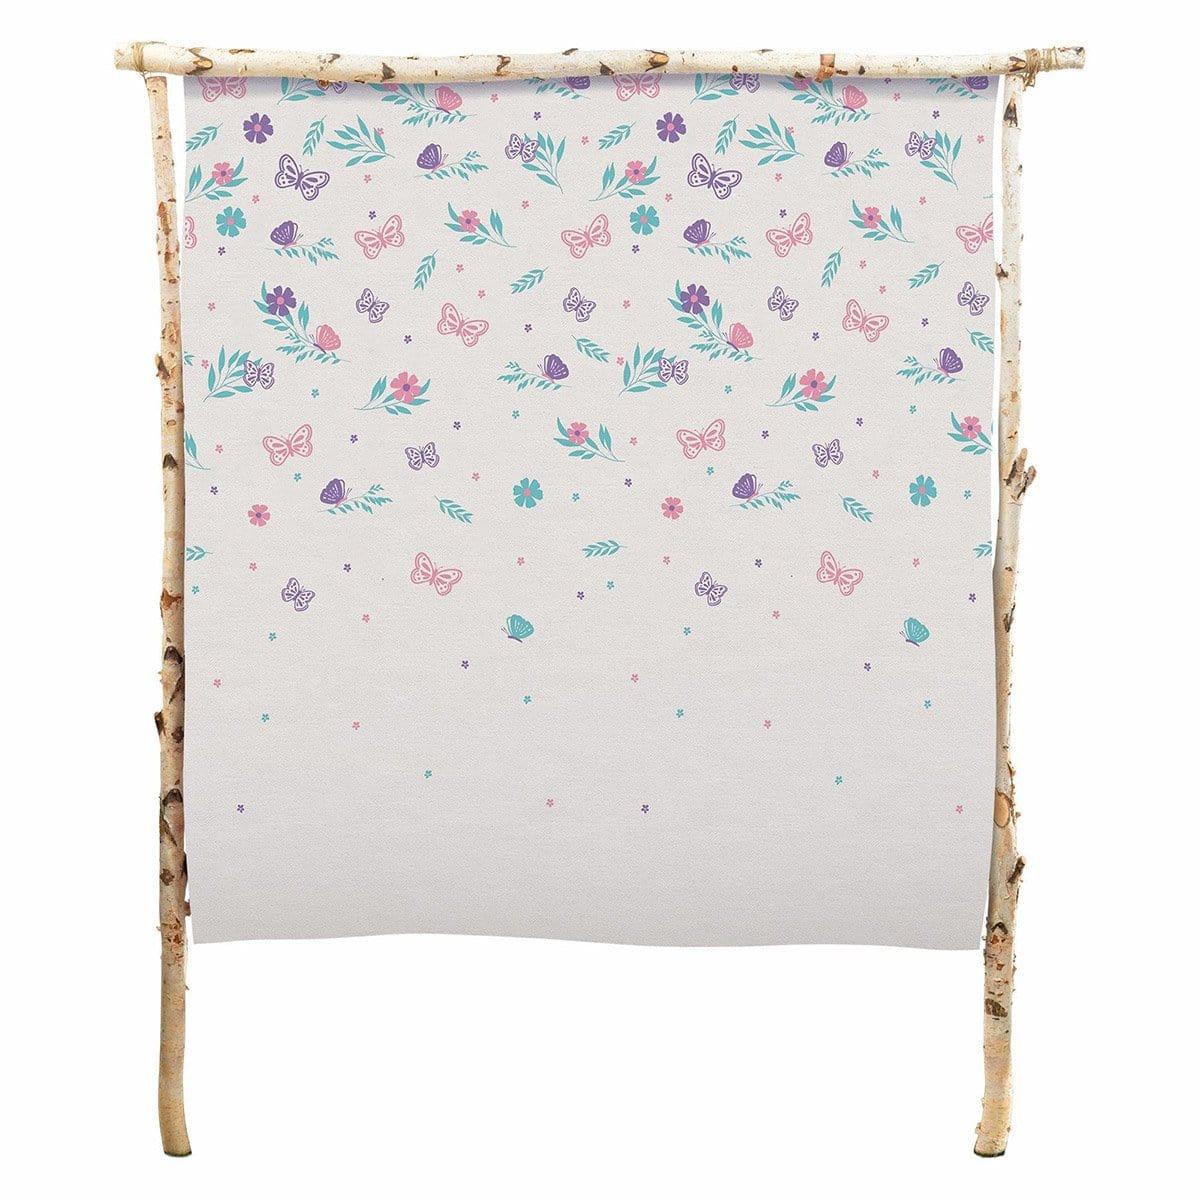 Buy Kids Birthday Flutter Party Canvas Backdrop sold at Party Expert